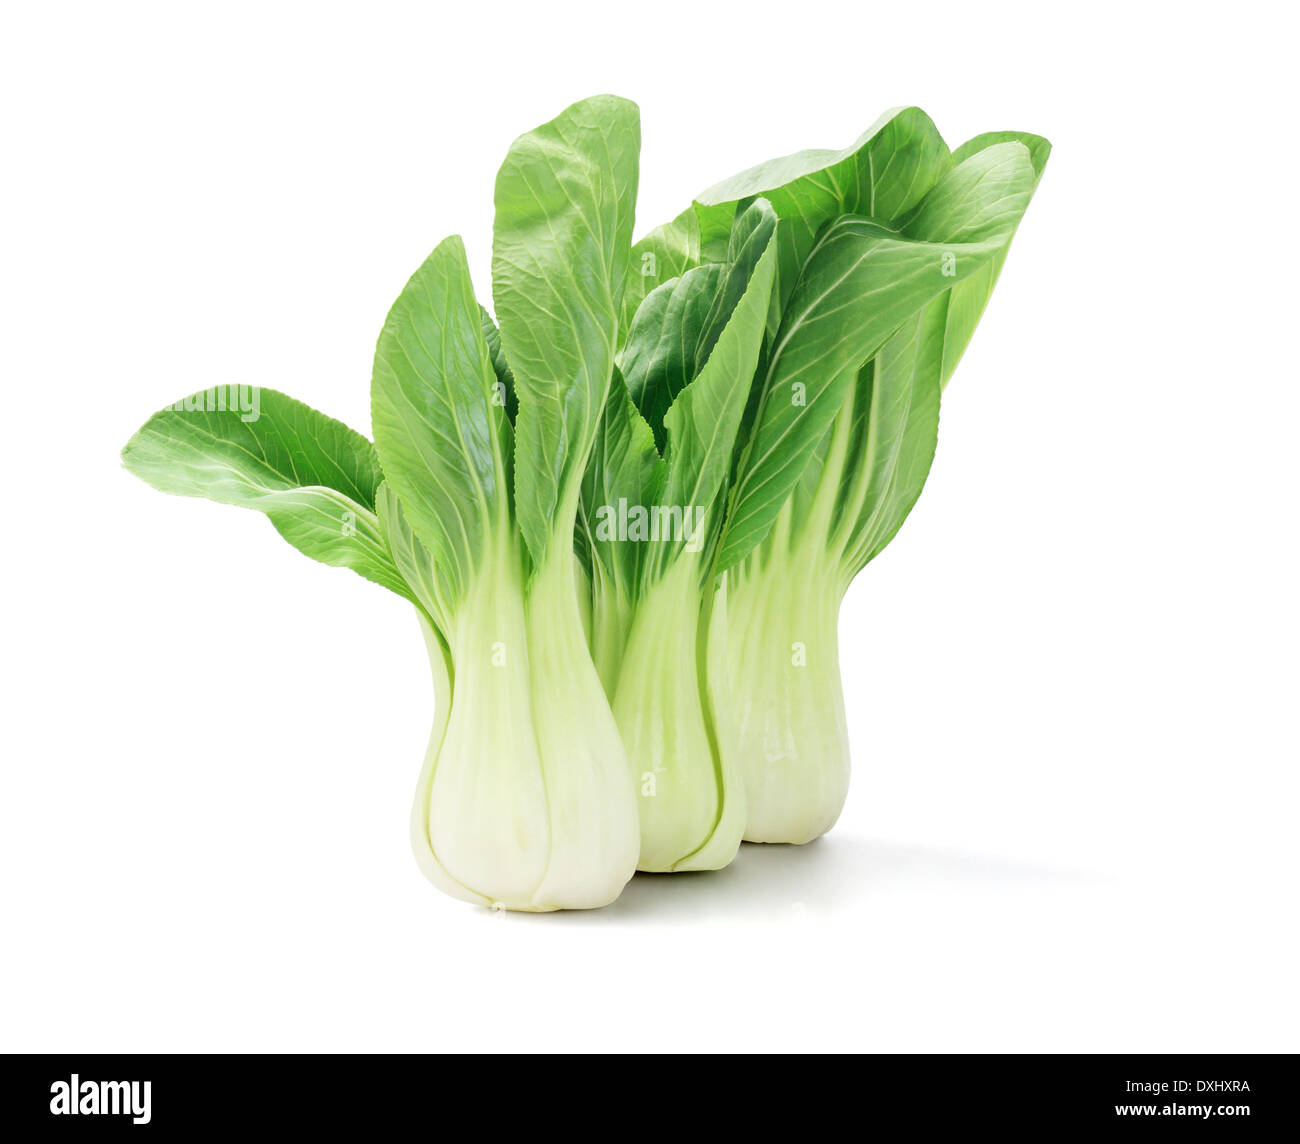 Green Fresh Chinese Cabbage On White Background Stock Photo